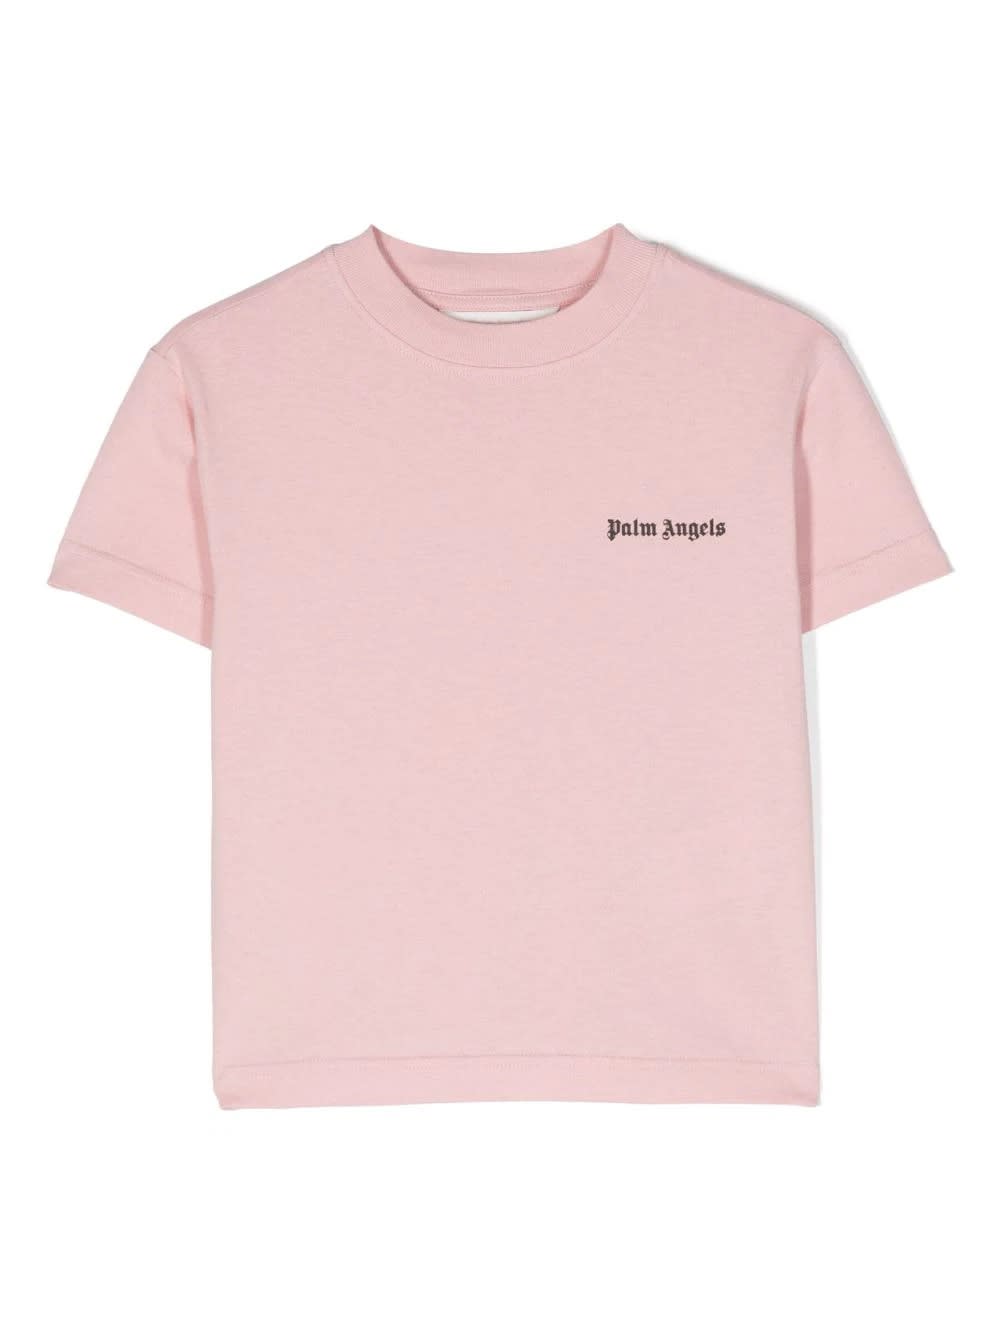 Palm Angels Kids' Pink T-shirt With Logo In White